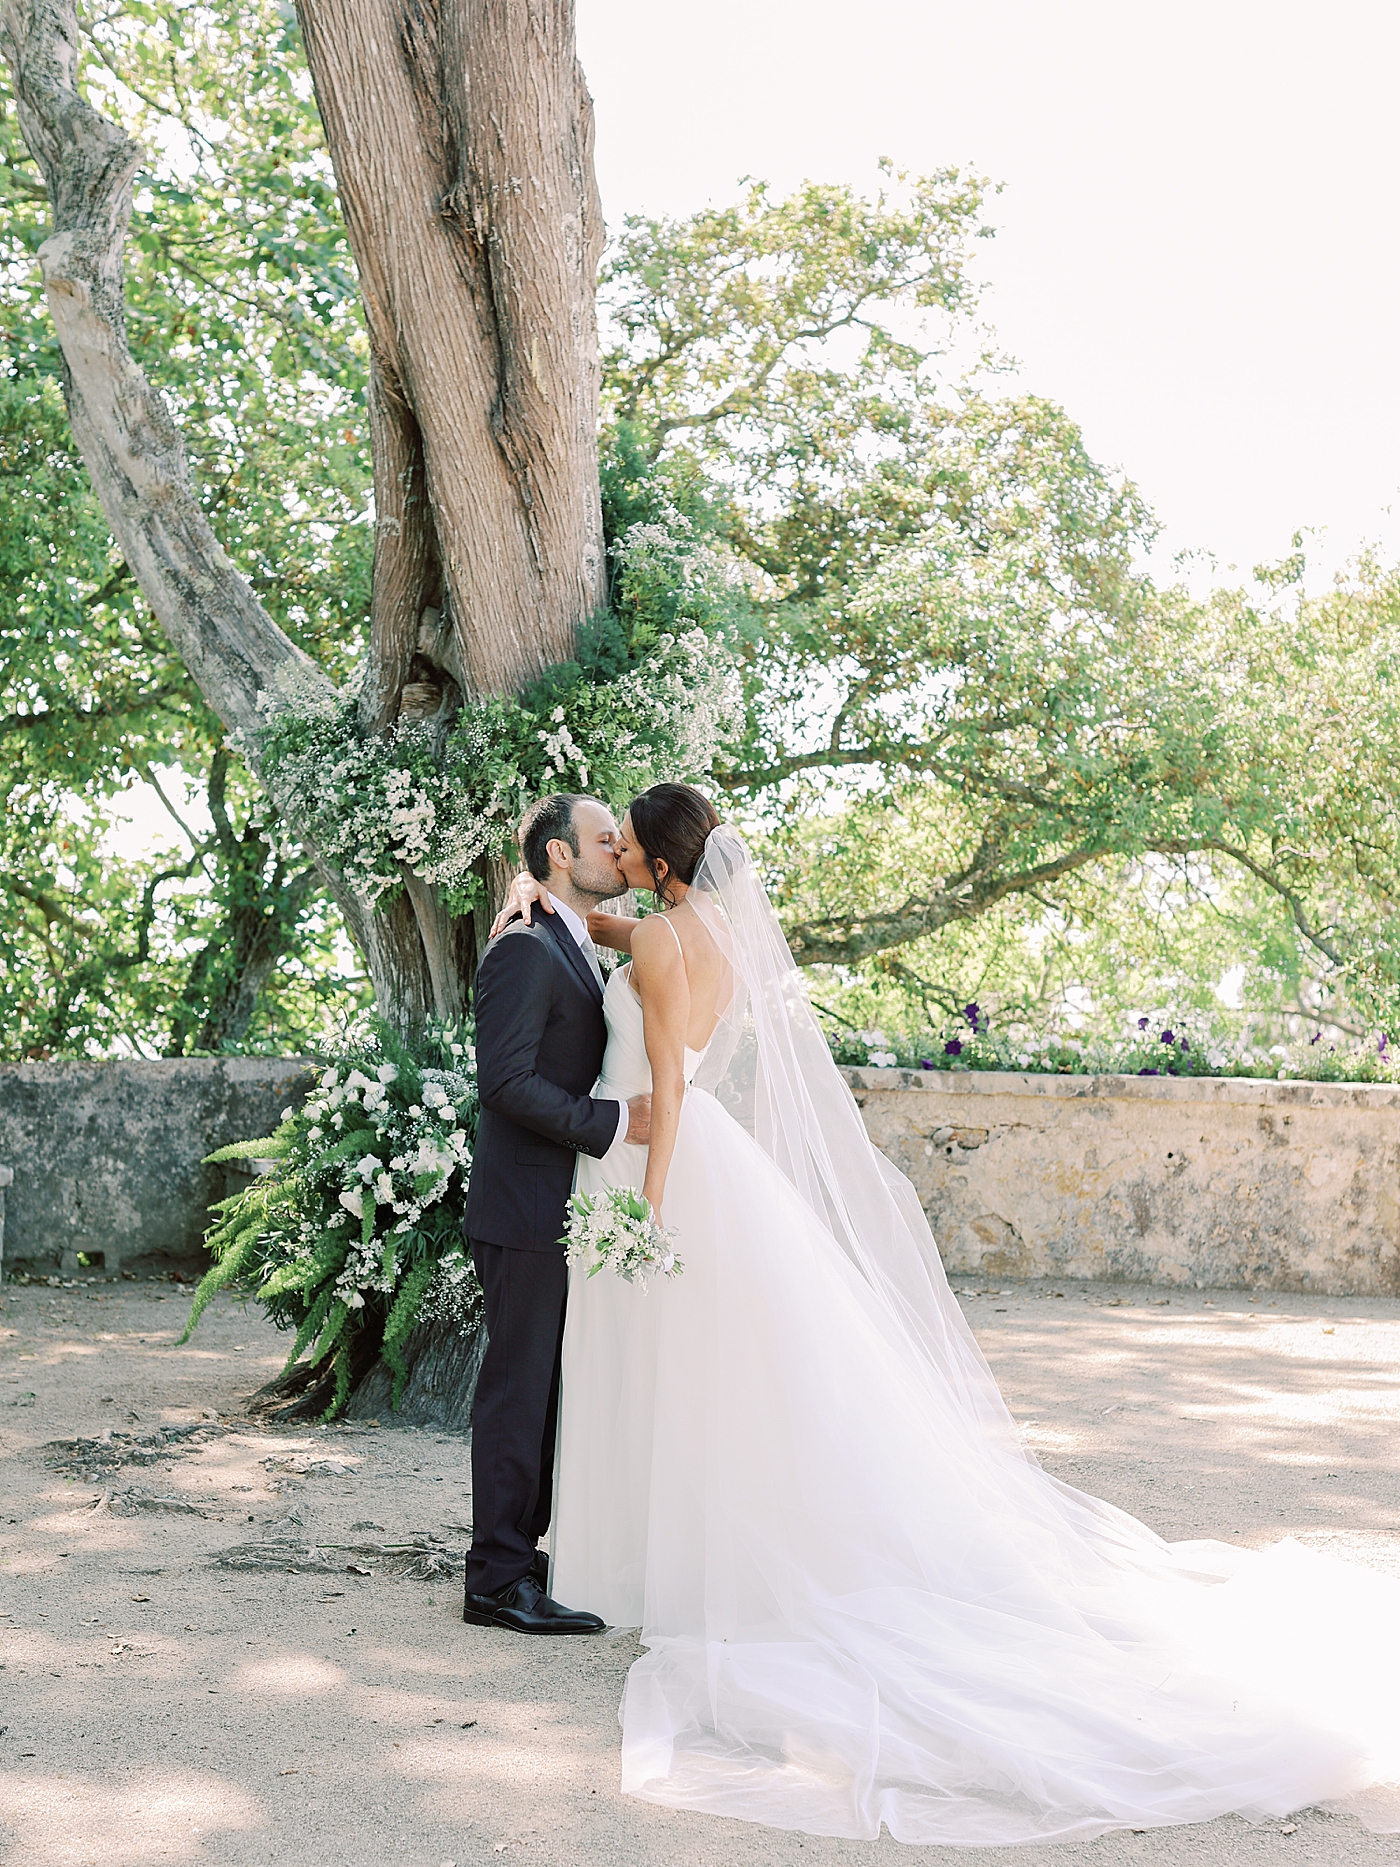 Bride and grooms first kiss | Image by Diane Sotero Photography